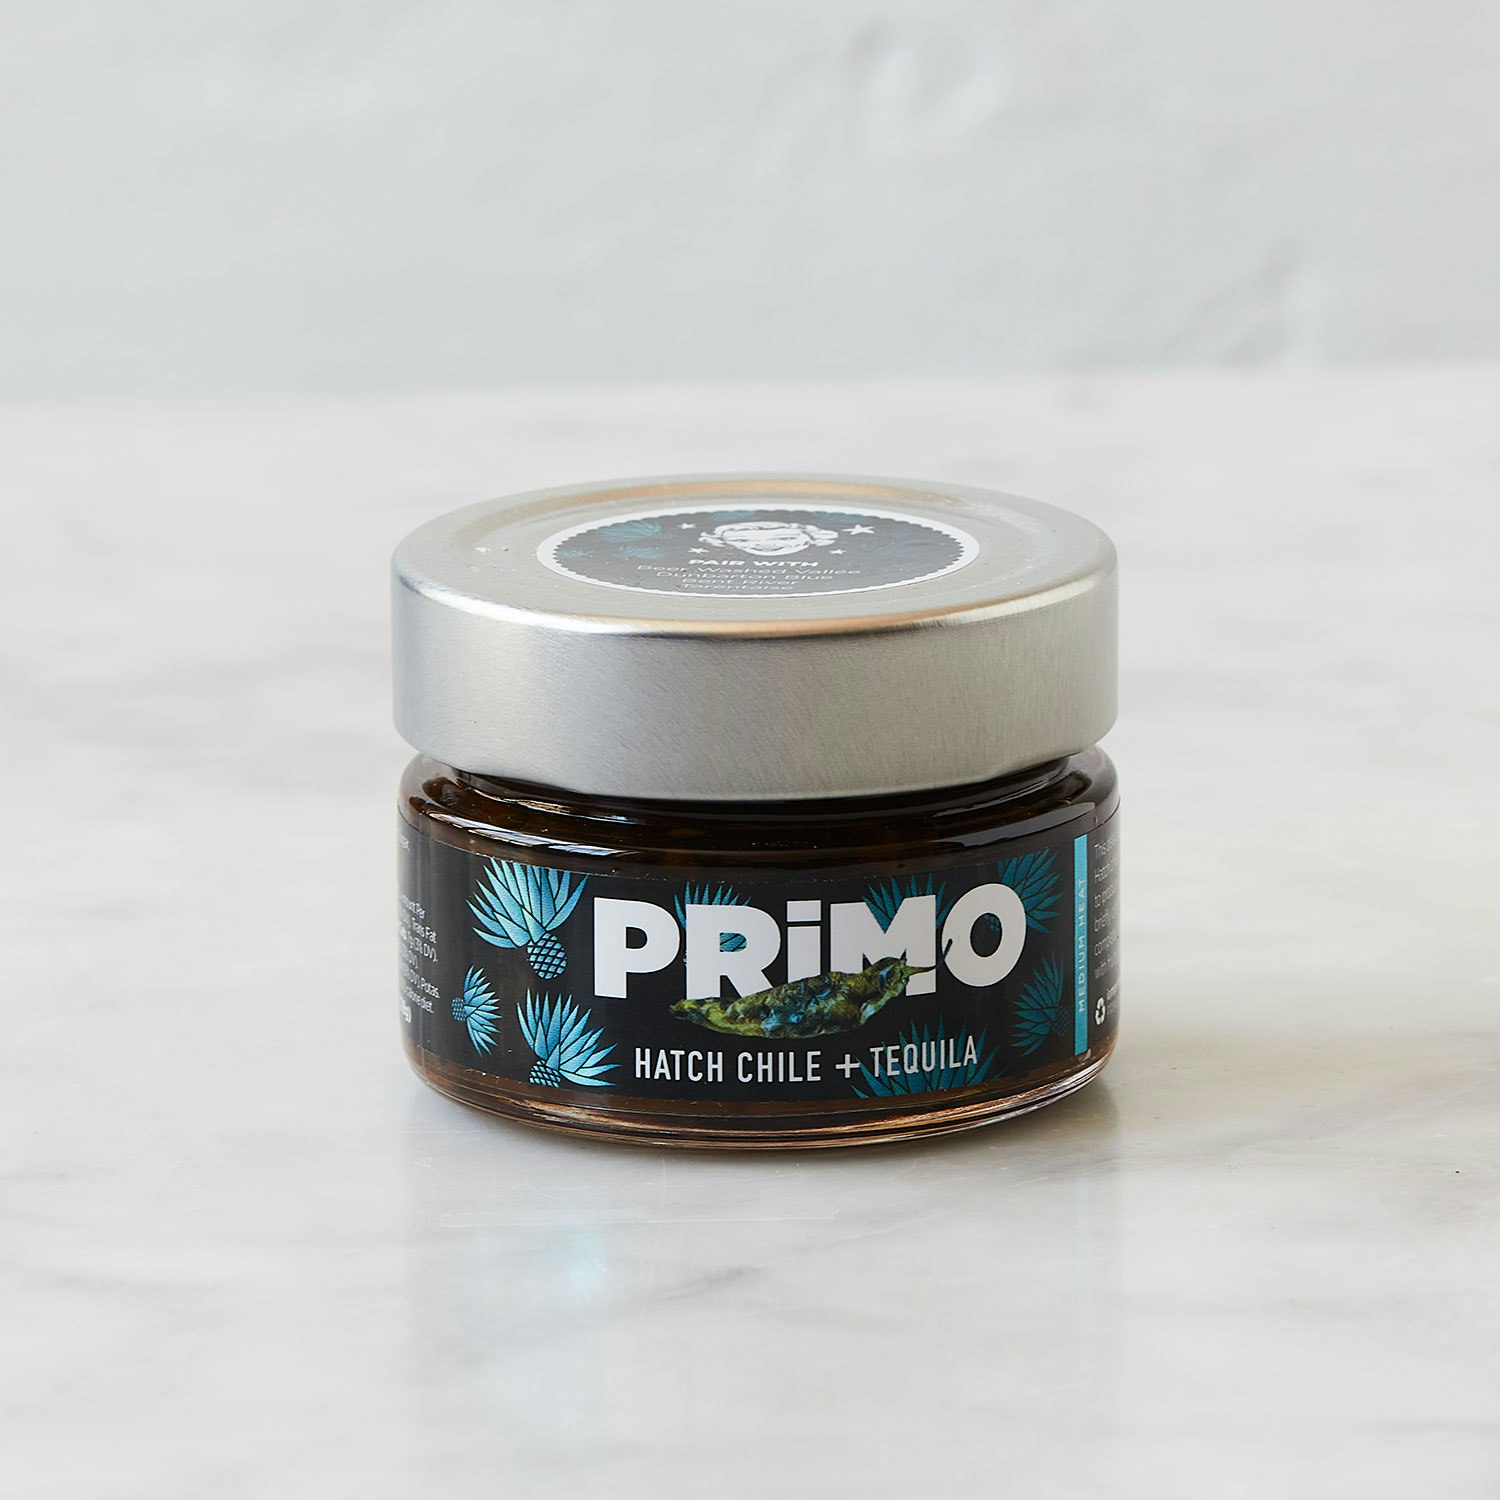 Primo Hatch Chile Tequila Preserves specialty foods